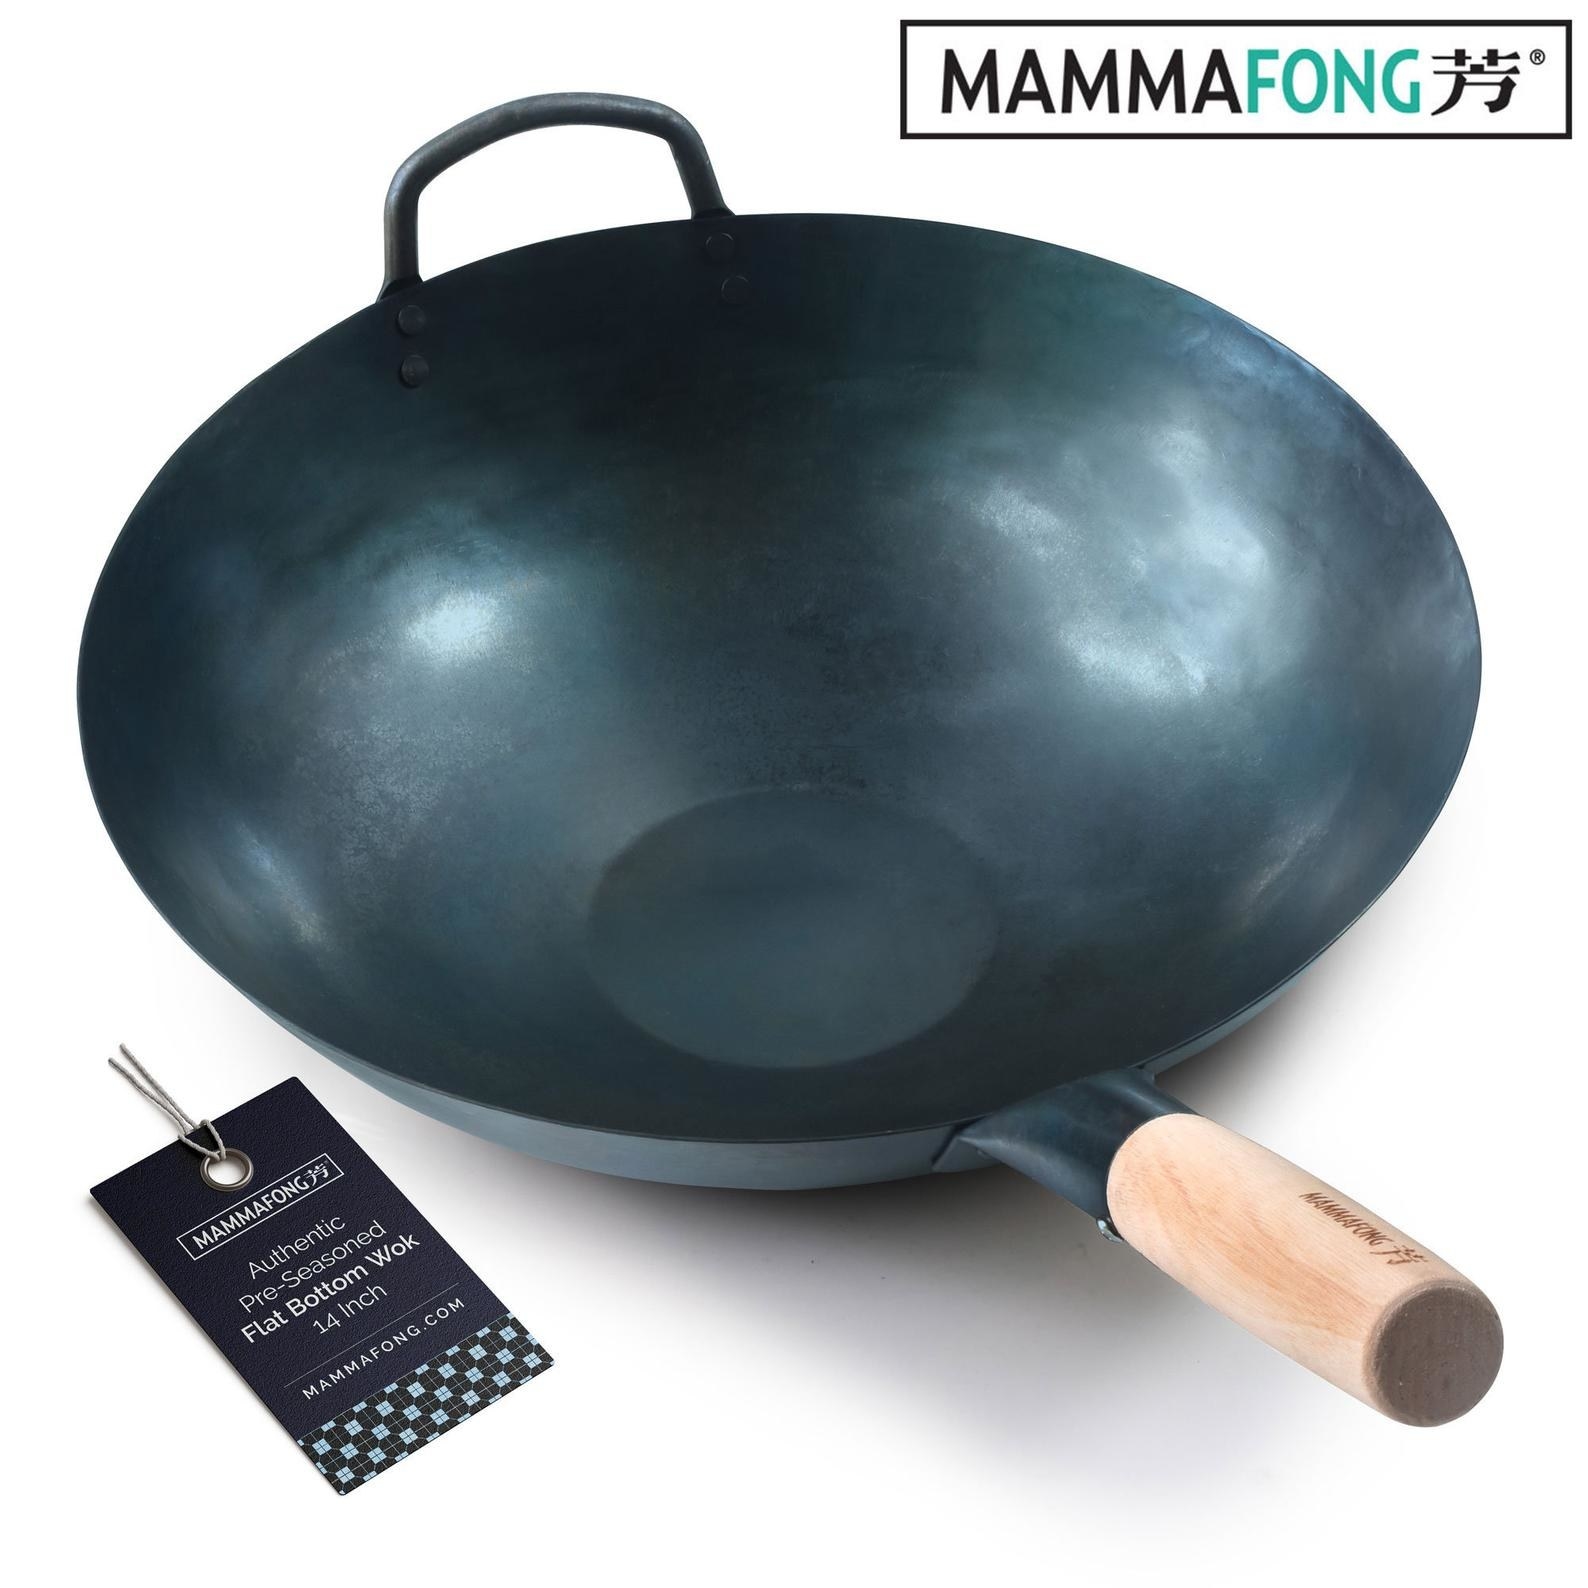 product image of wok with Mammafong logo in upper right-hand corner and label on the side